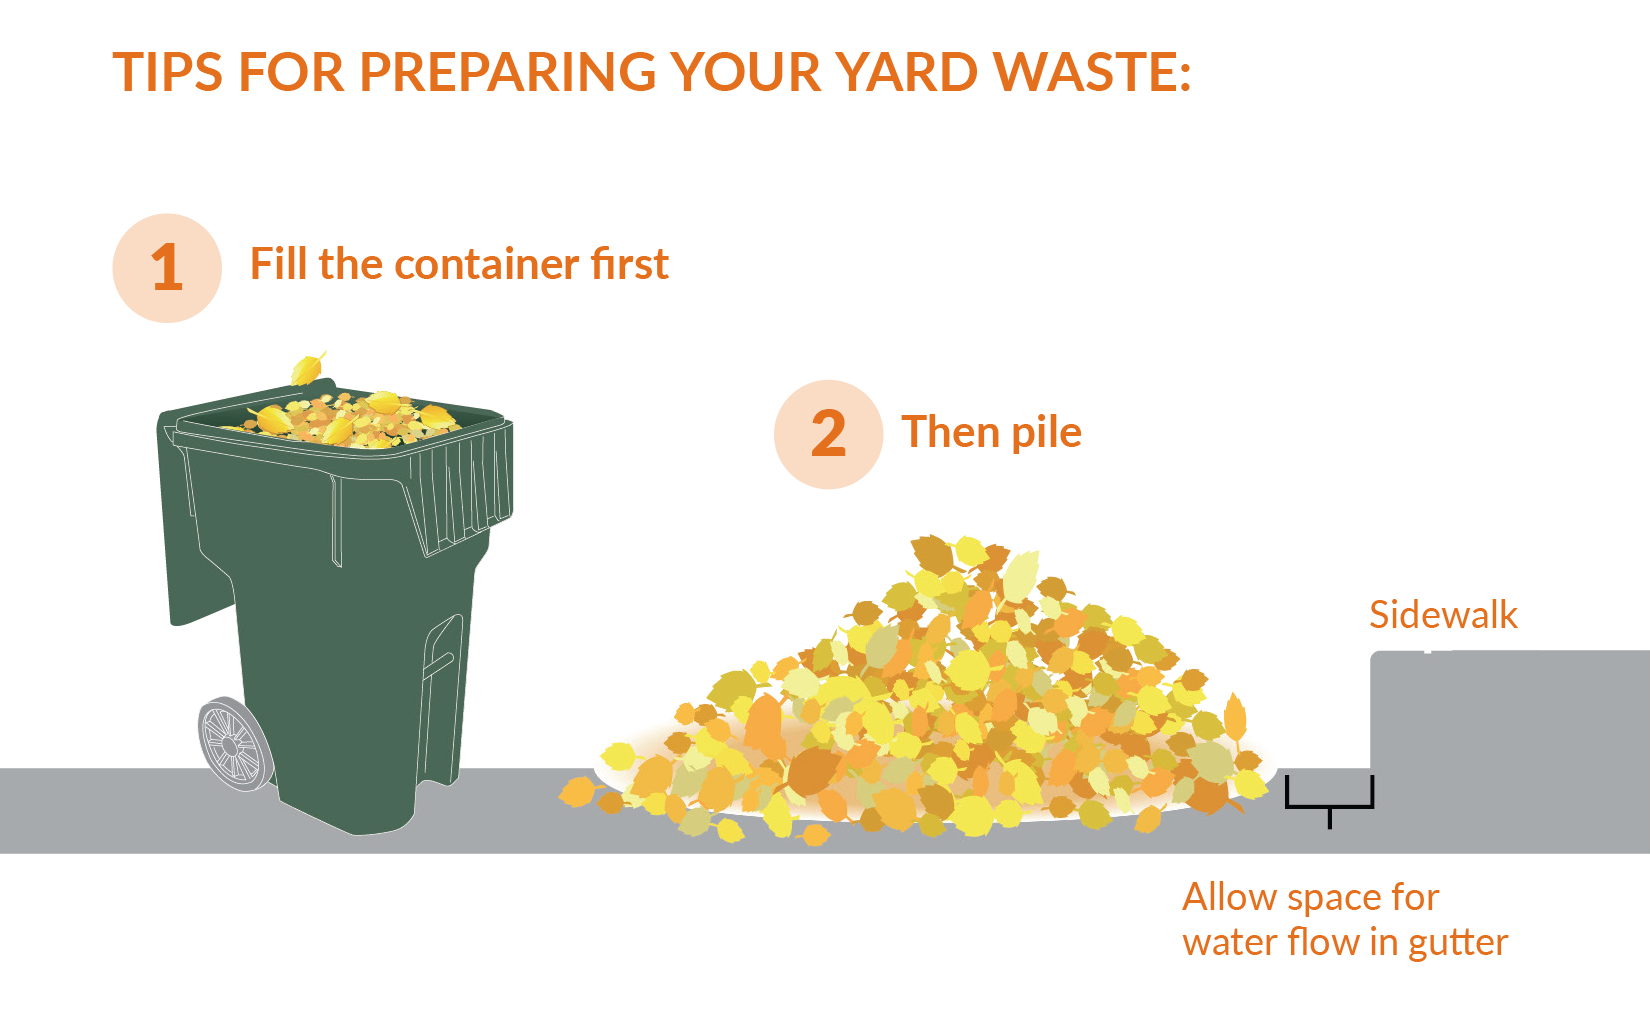 Fill your container, then make a neat pile with the excess yard waste